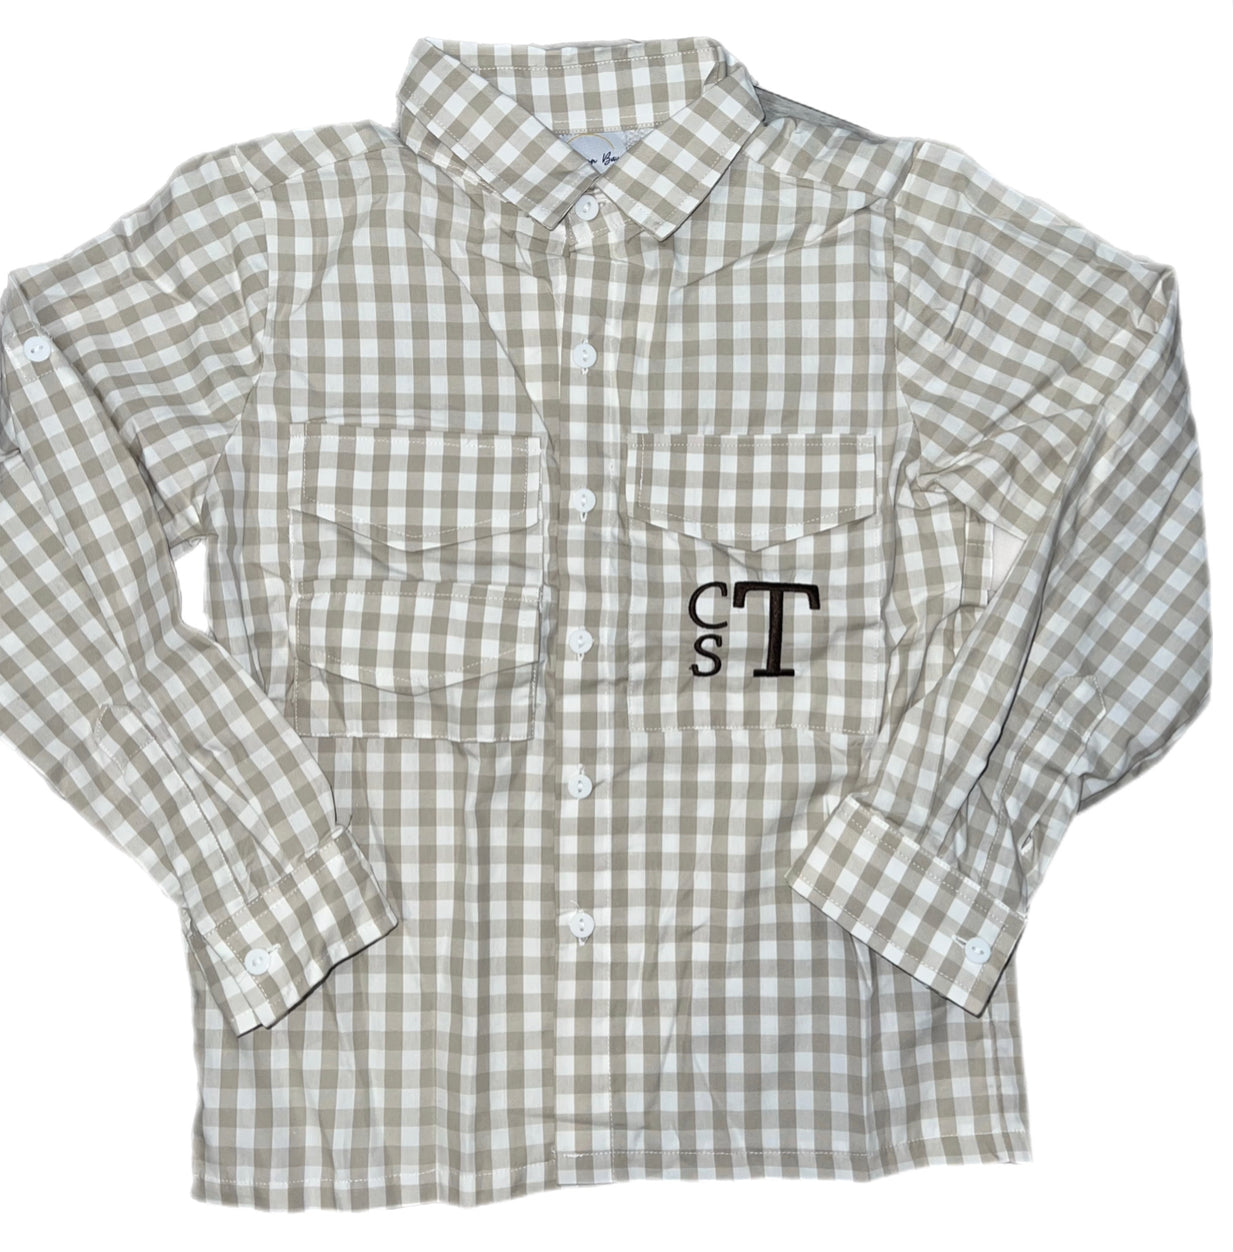 RTS: SBSC- Boys Only Collection- Duck Applique- Boys Woven Shirt “CTS”